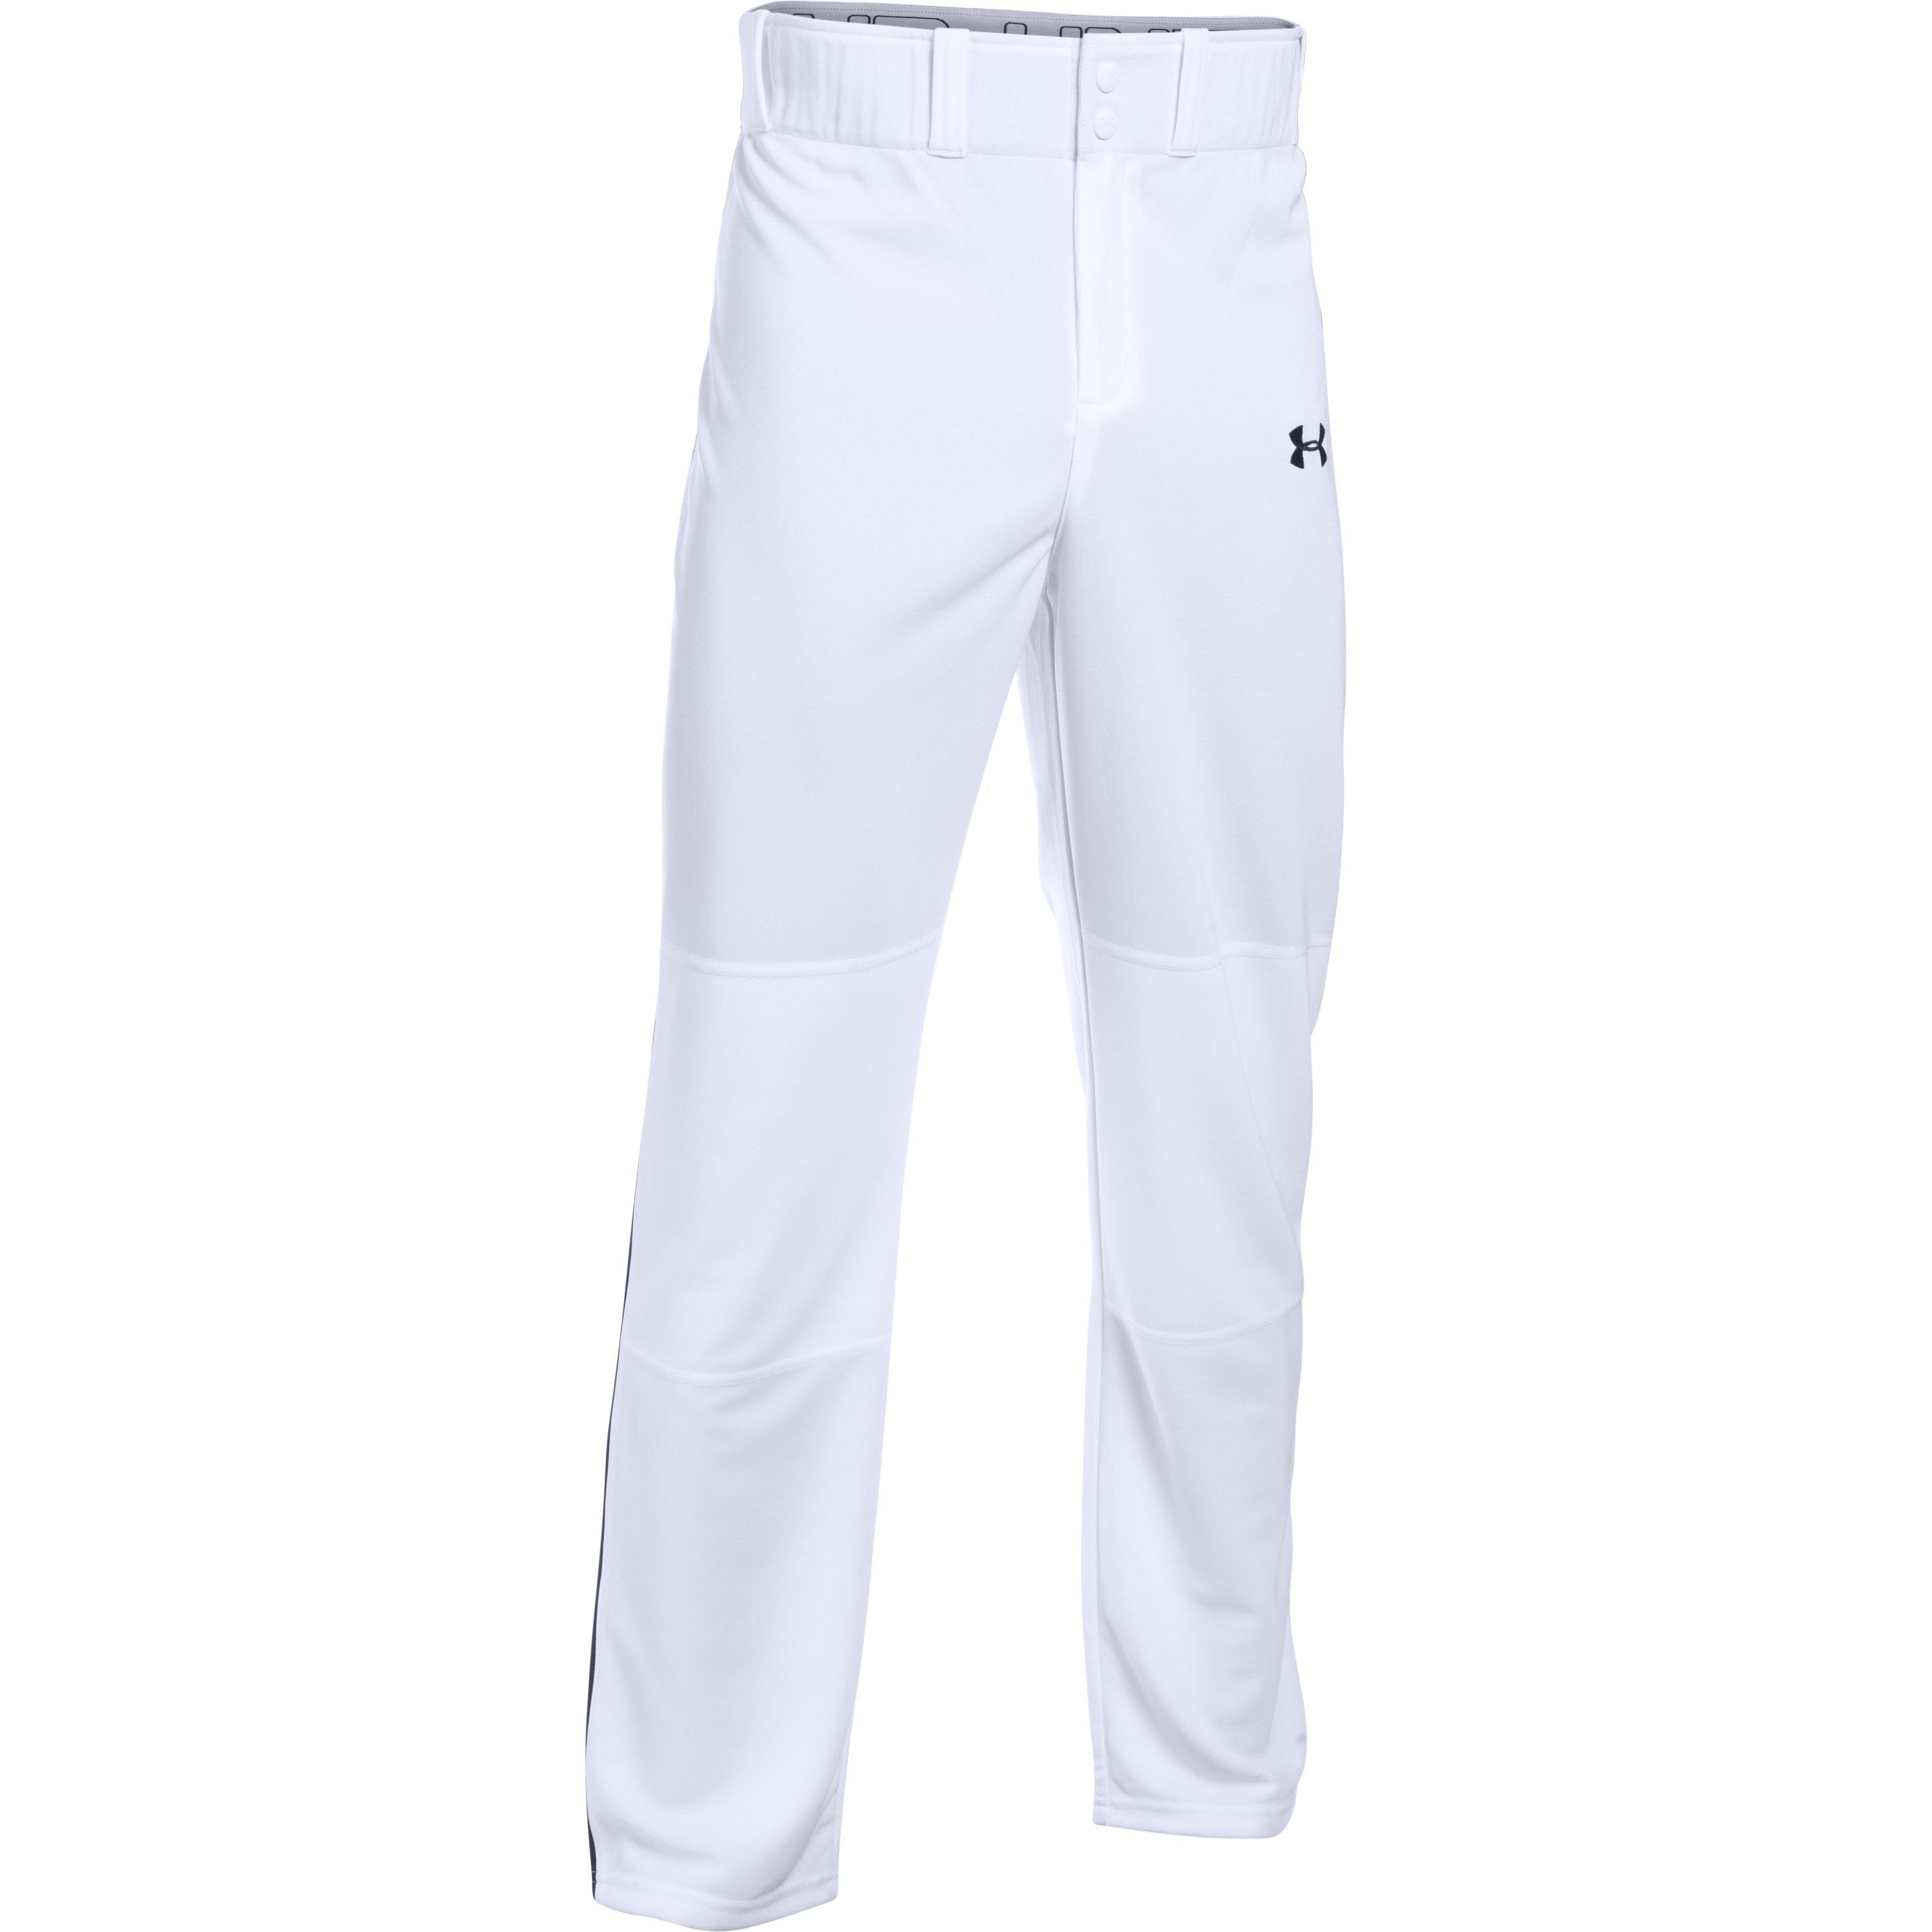 Open Bottom 1280996 Under Armour UA Adult Men's Clean Up Piped Baseball Pants 